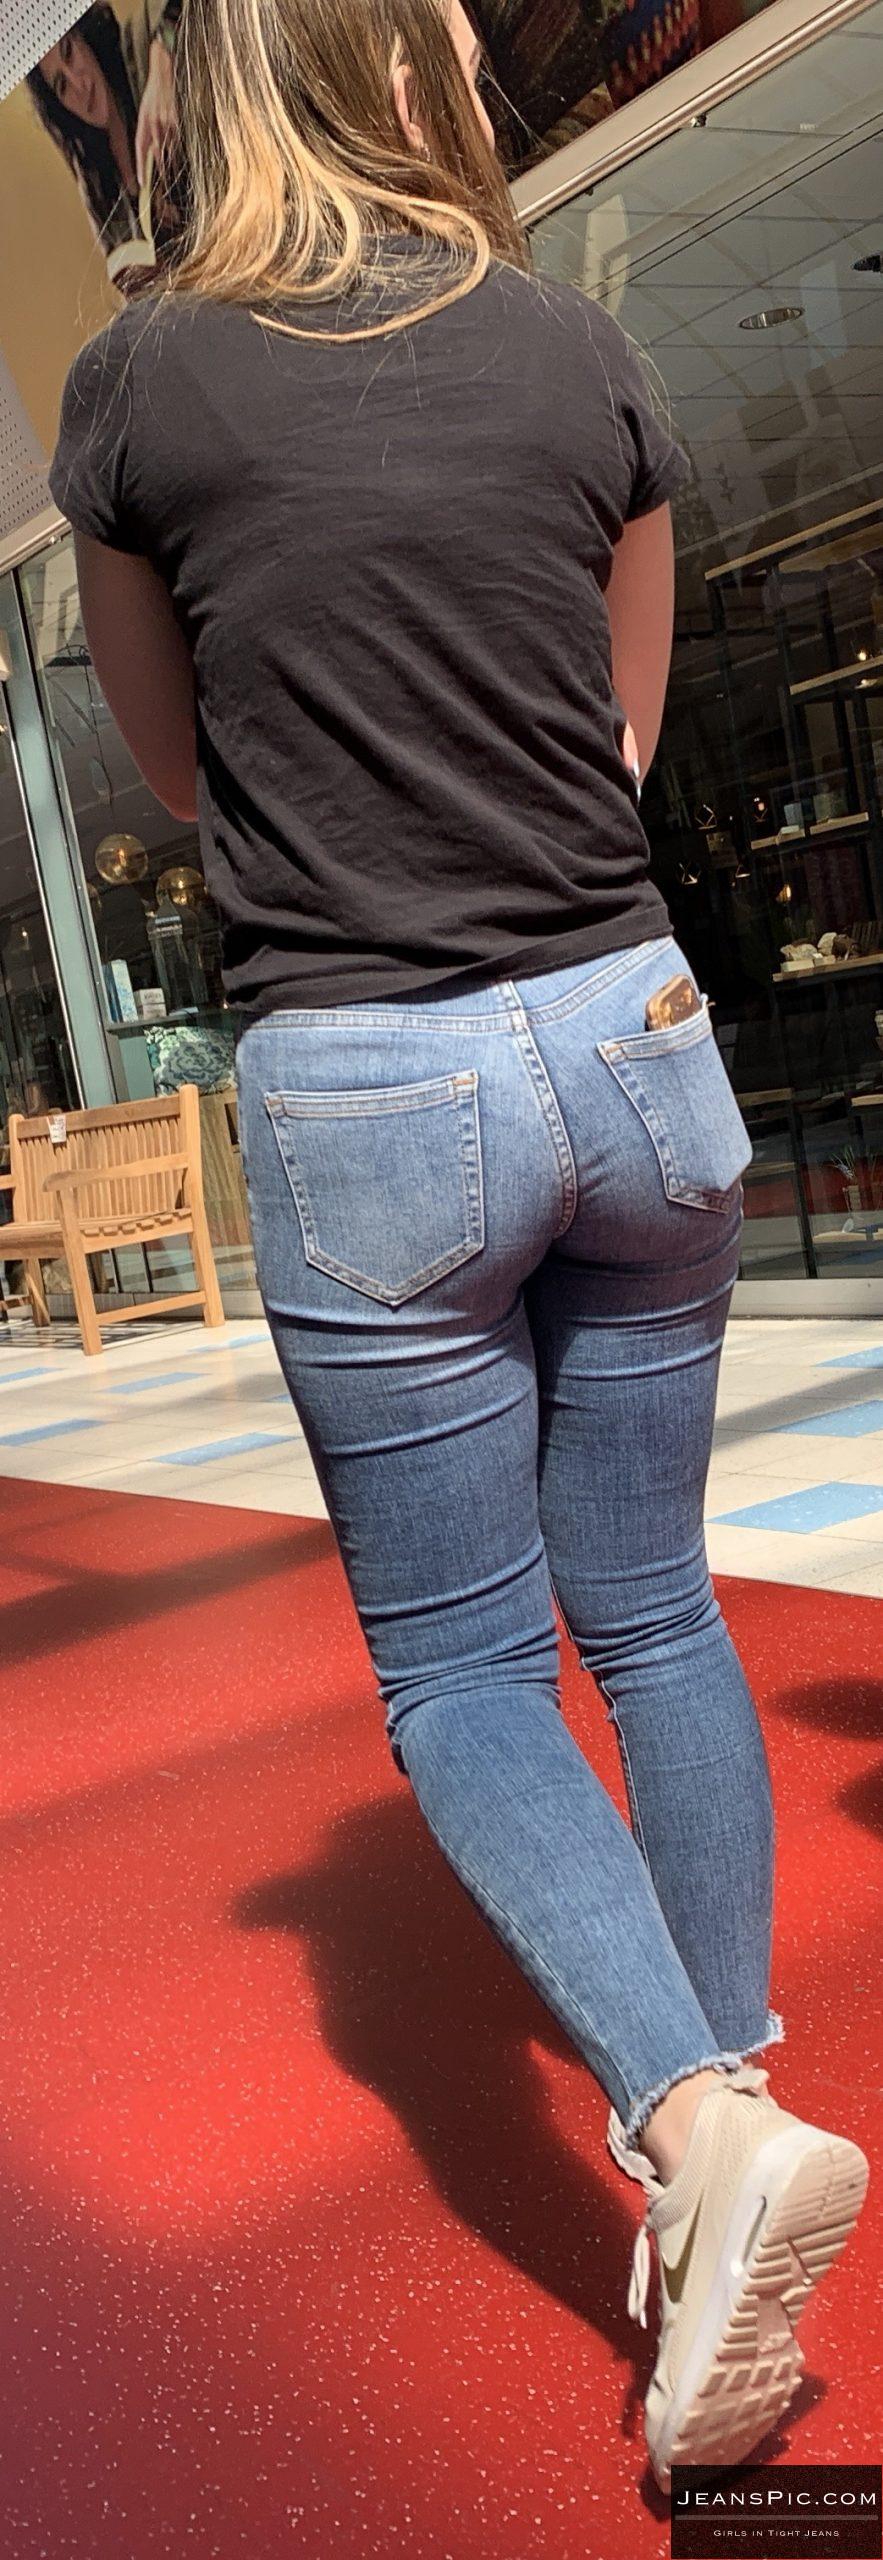 Blonde Candid Ass In Tight Jeans 2 Scrolller